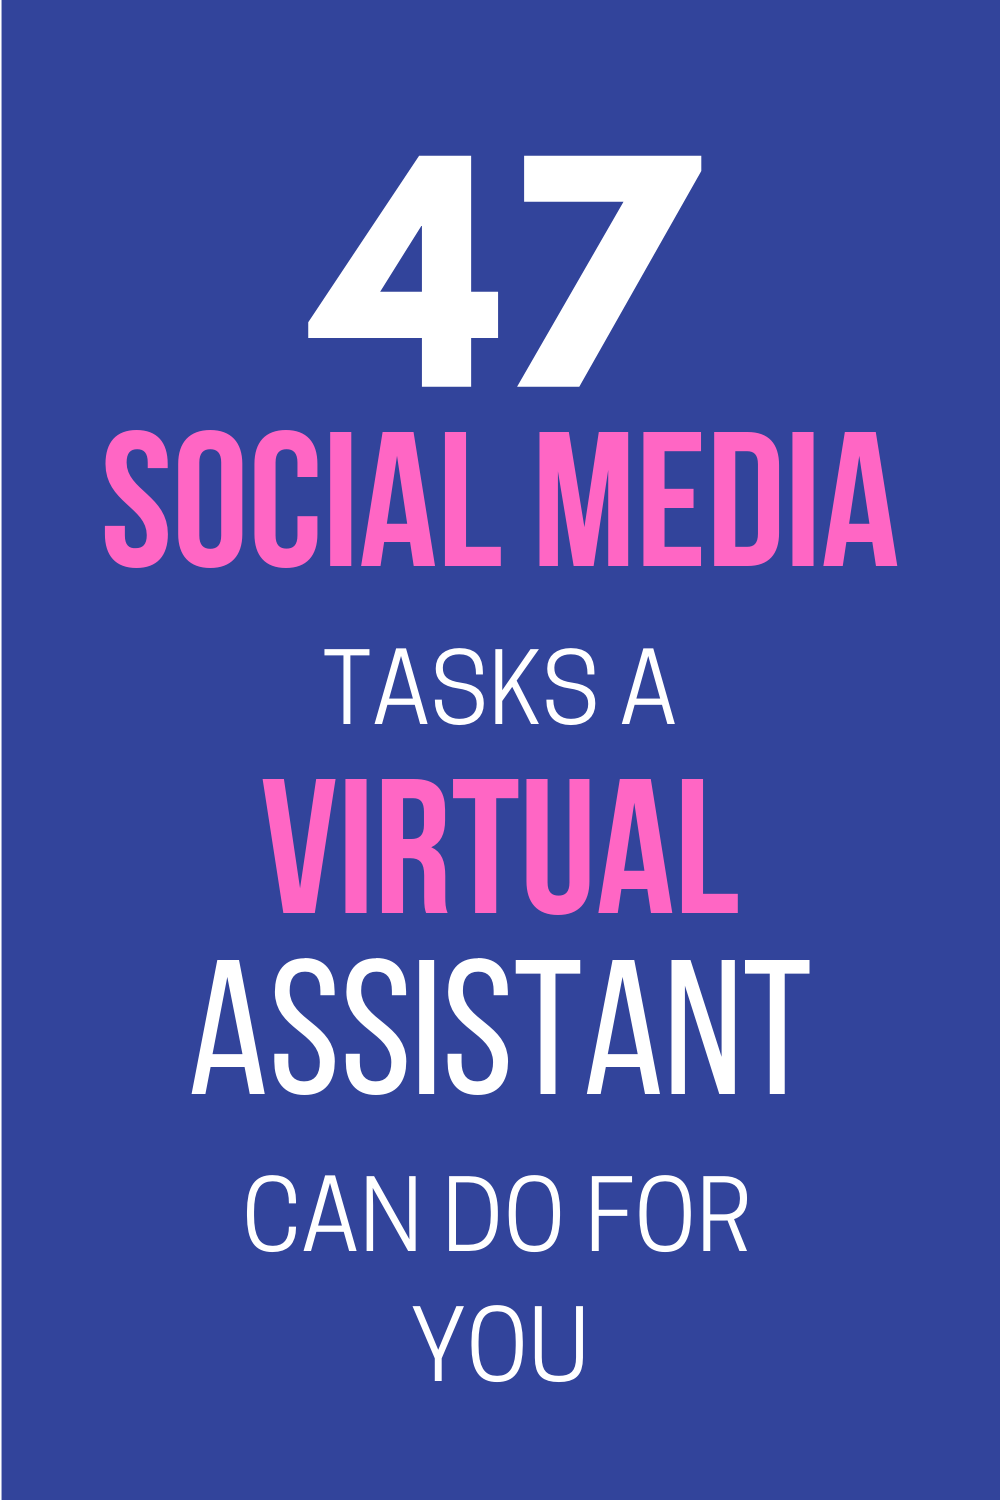 47 Social Media tasks a Virtual Assistant can do for you